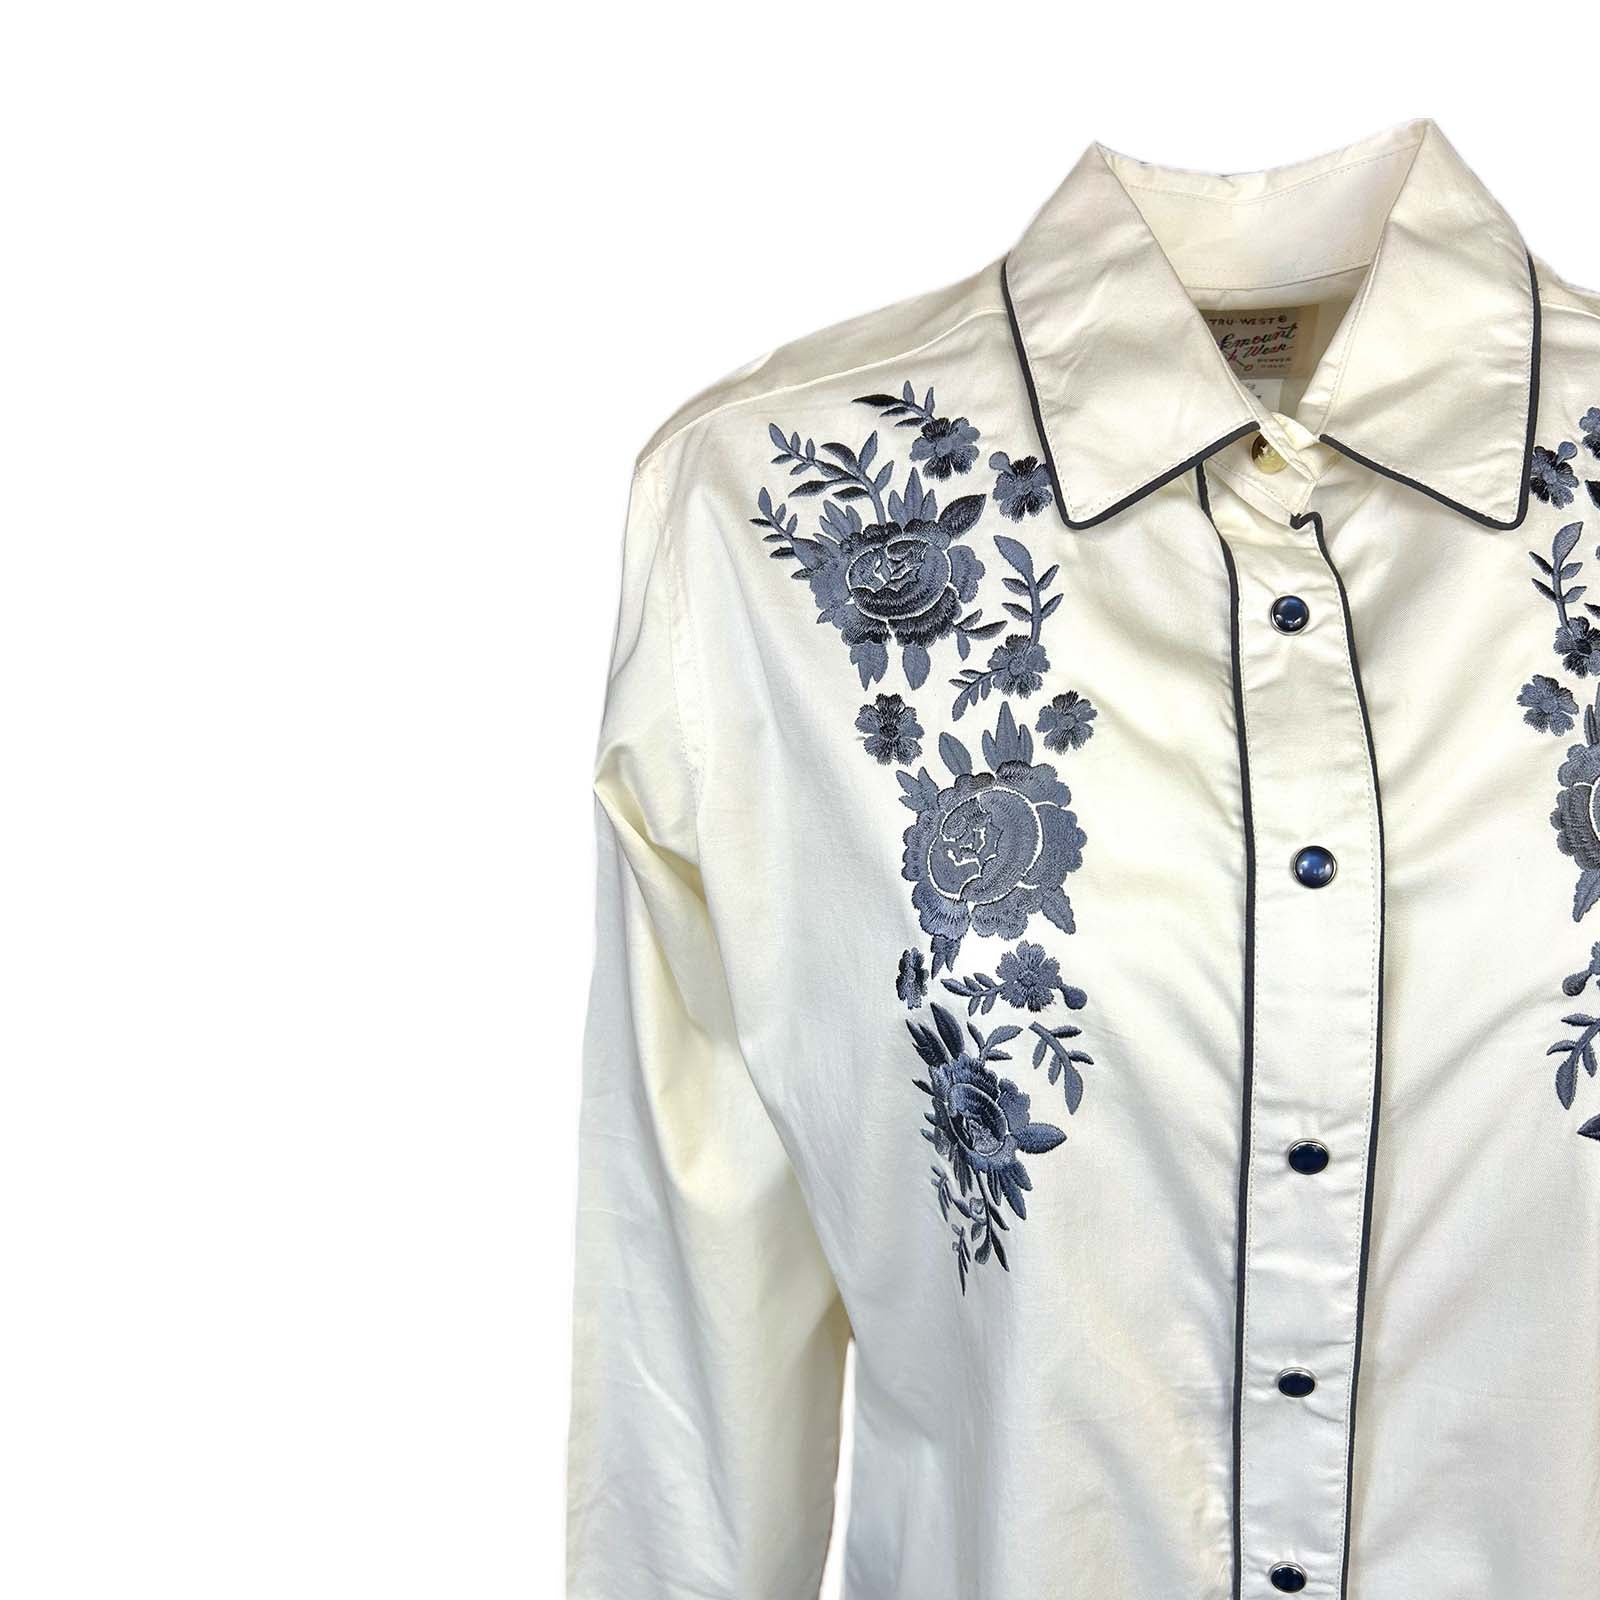 The Floral Embroidered Shirt - S